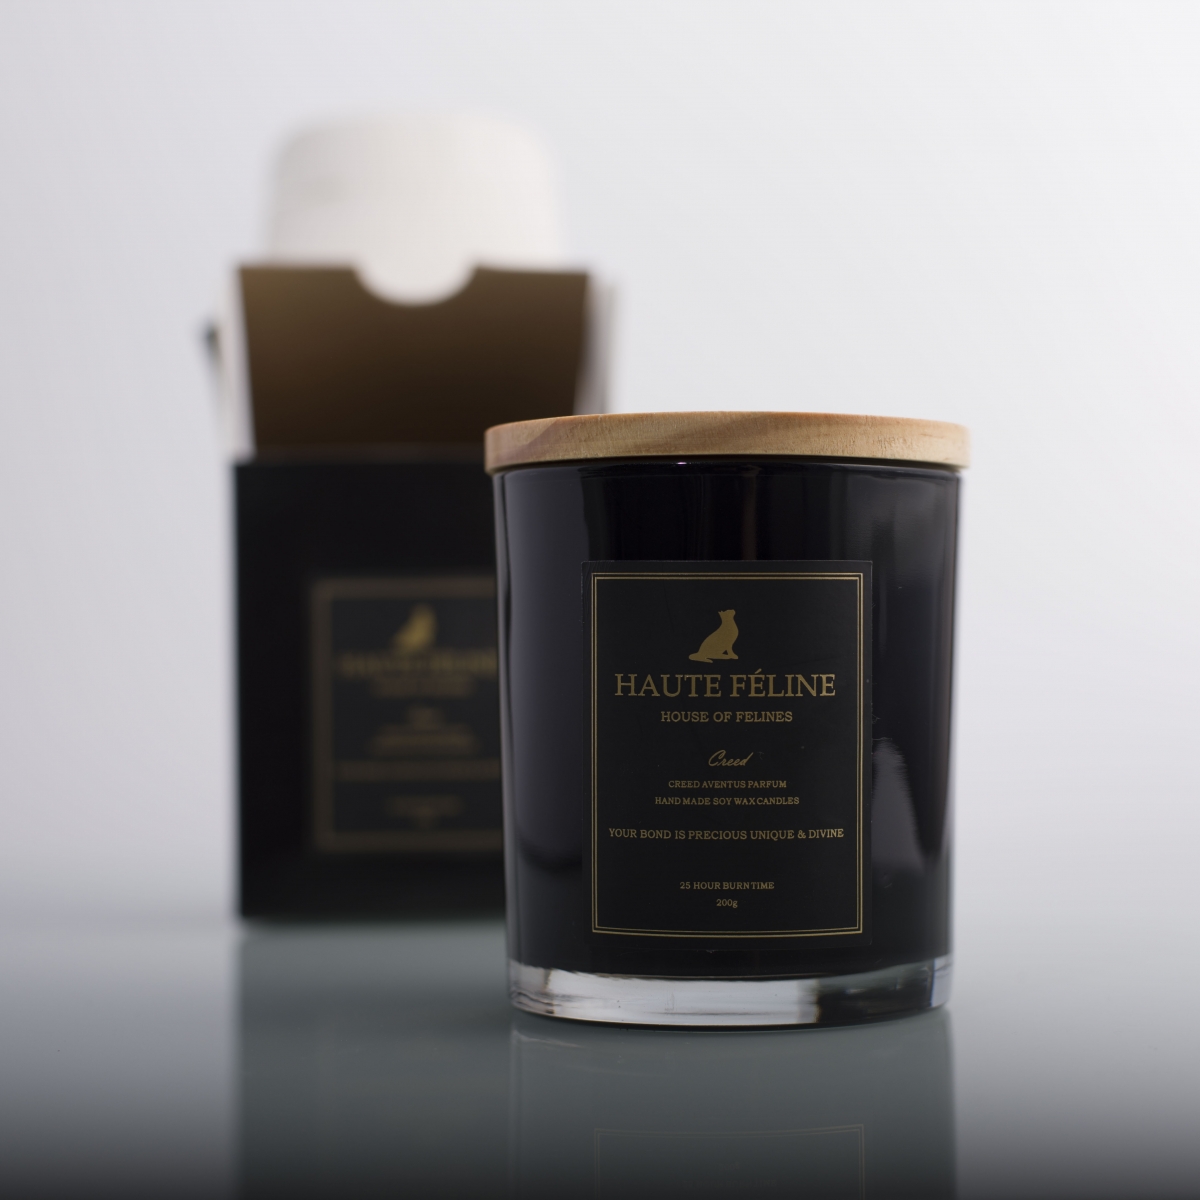 Scented Candles -Best Soy Candles,Creed Aventus ,Perfume Candles ,Wooden Wick ,Shiny Black Candle Jar ,Gold Foil Label, China Factory ,Price-HOWCANDLE-Candles,Scented Candles,Aromatherapy Candles,Soy Candles,Vegan Candles,Jar Candles,Pillar Candles,Candle Gift Sets,Essential Oils,Reed Diffuser,Candle Holder,